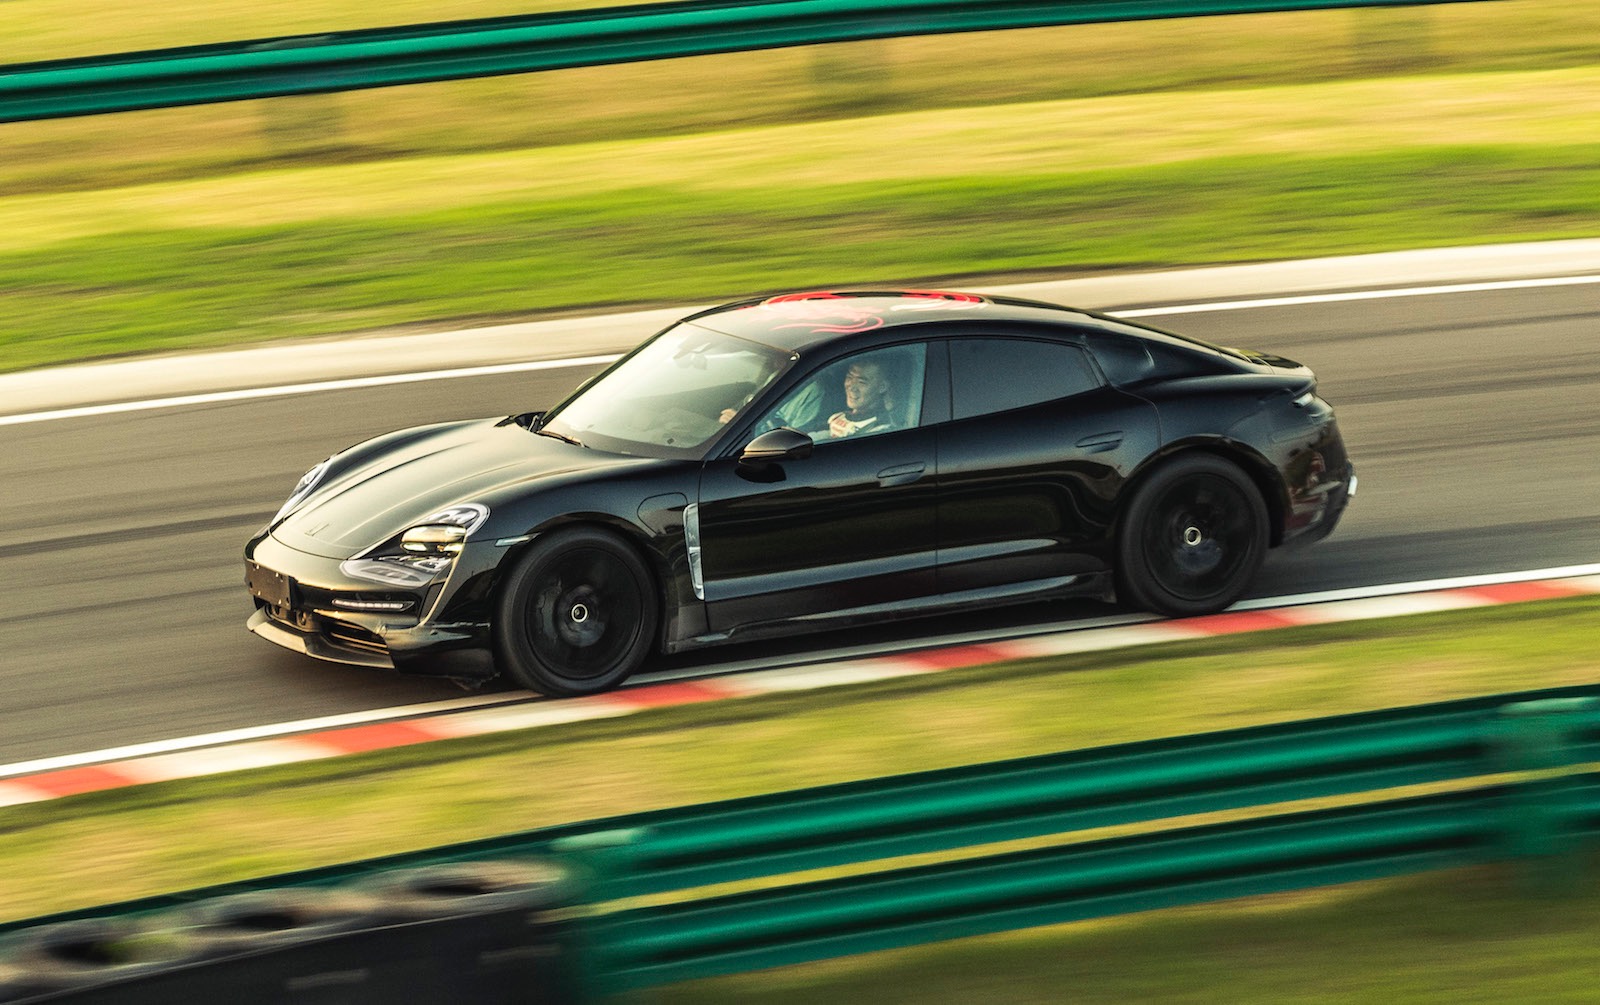 Porsche Taycan goes on tour, demo runs at Goodwood confirmed